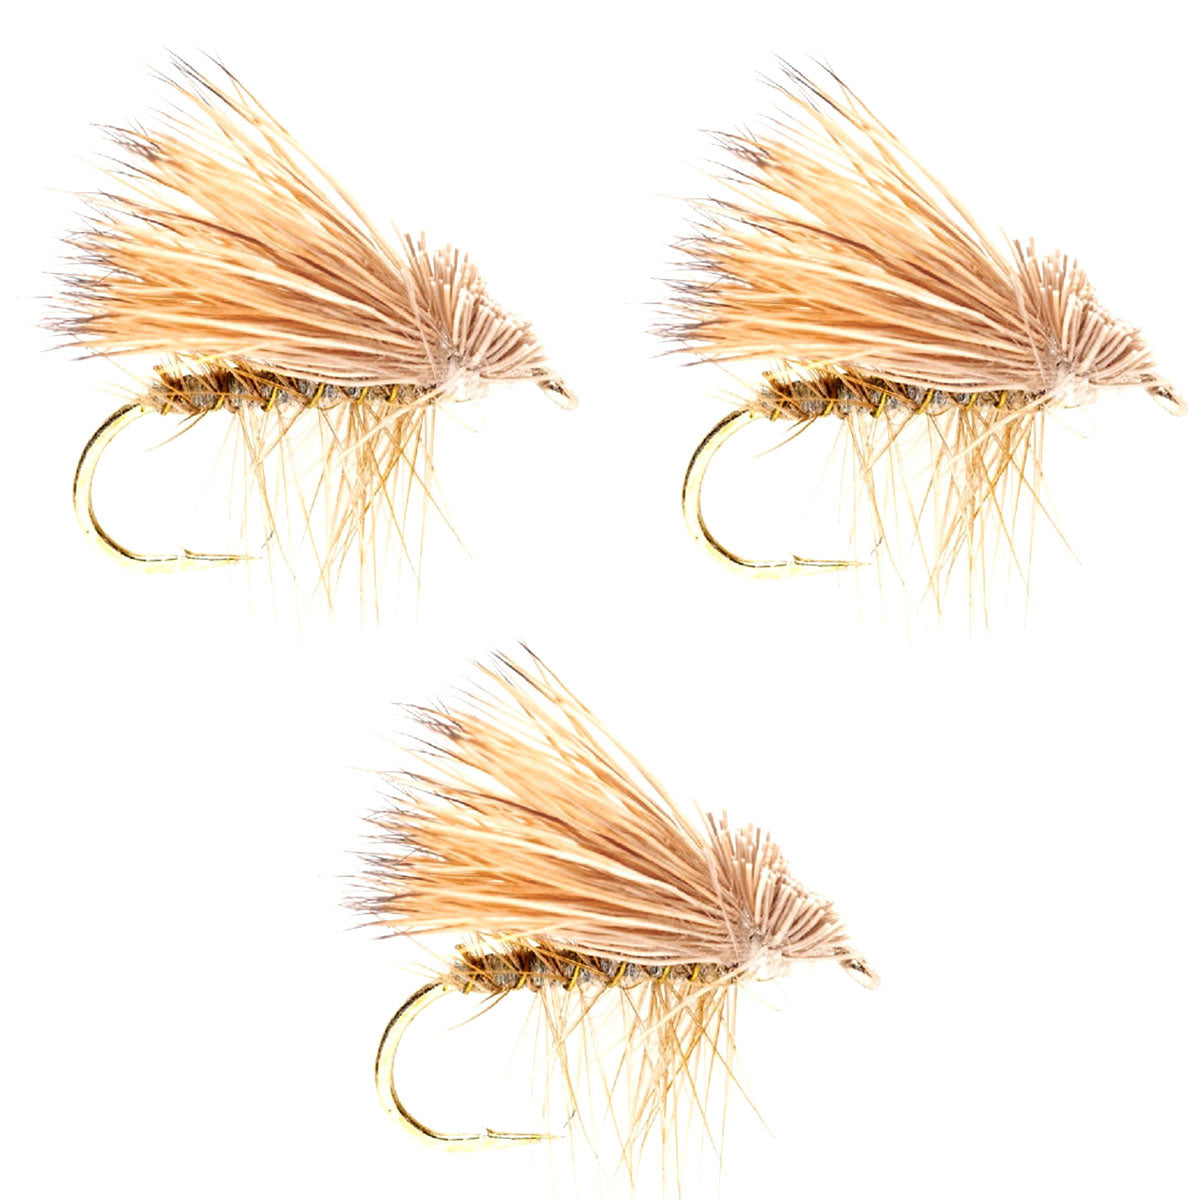 3 Pack Yellow Elk Hair Caddis Classic Trout Dry Flies Size 18